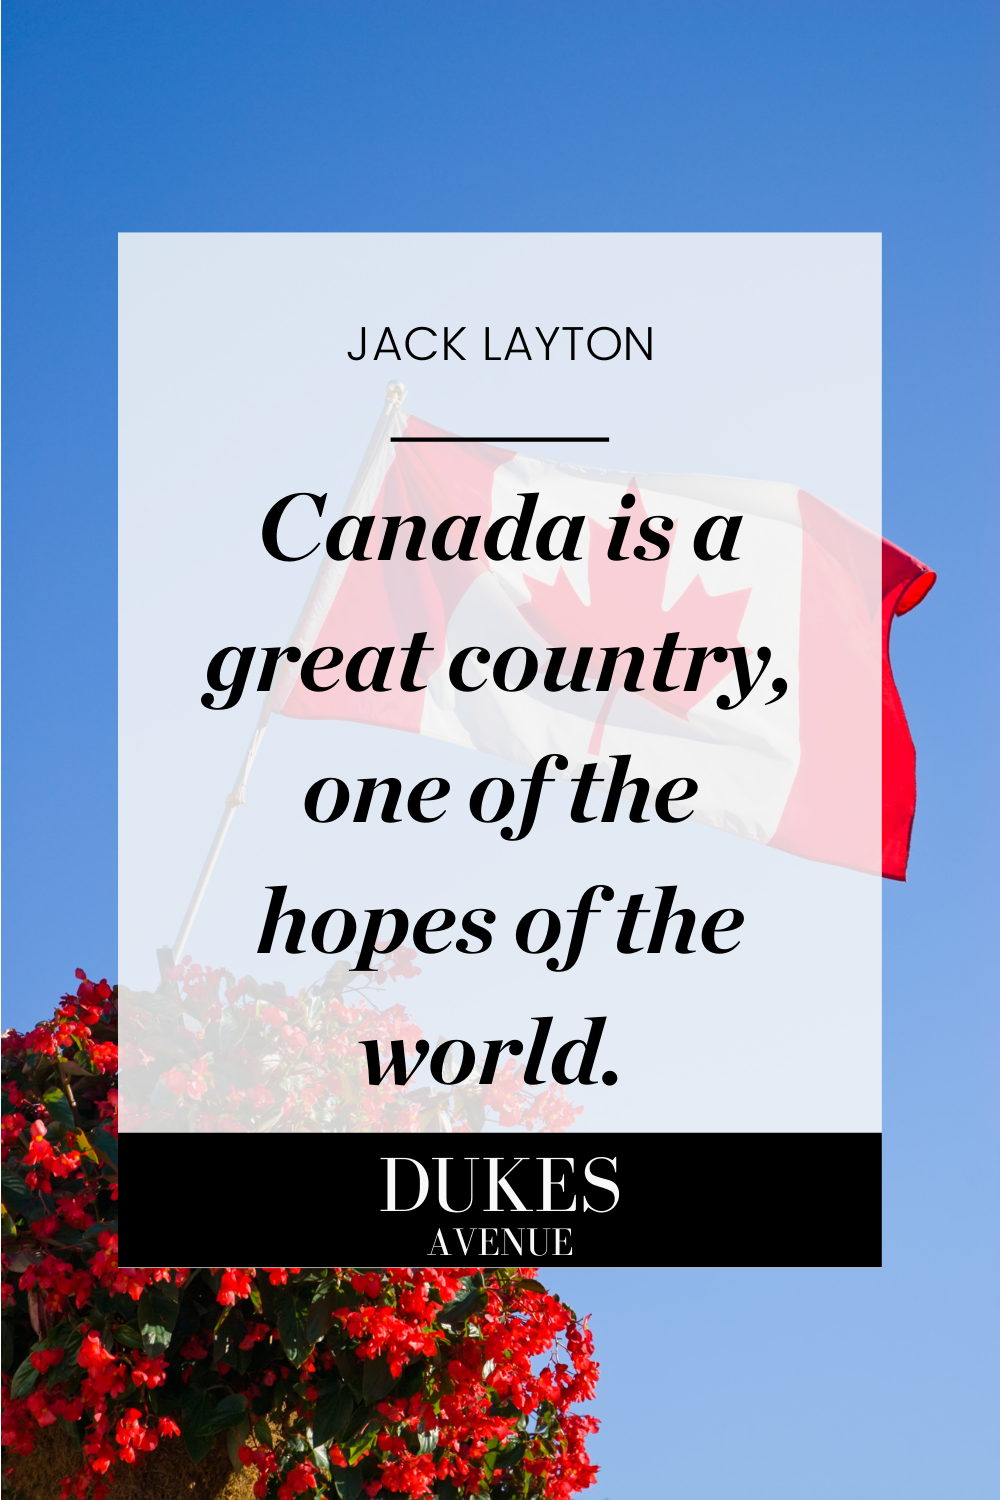 trip to canada quotes